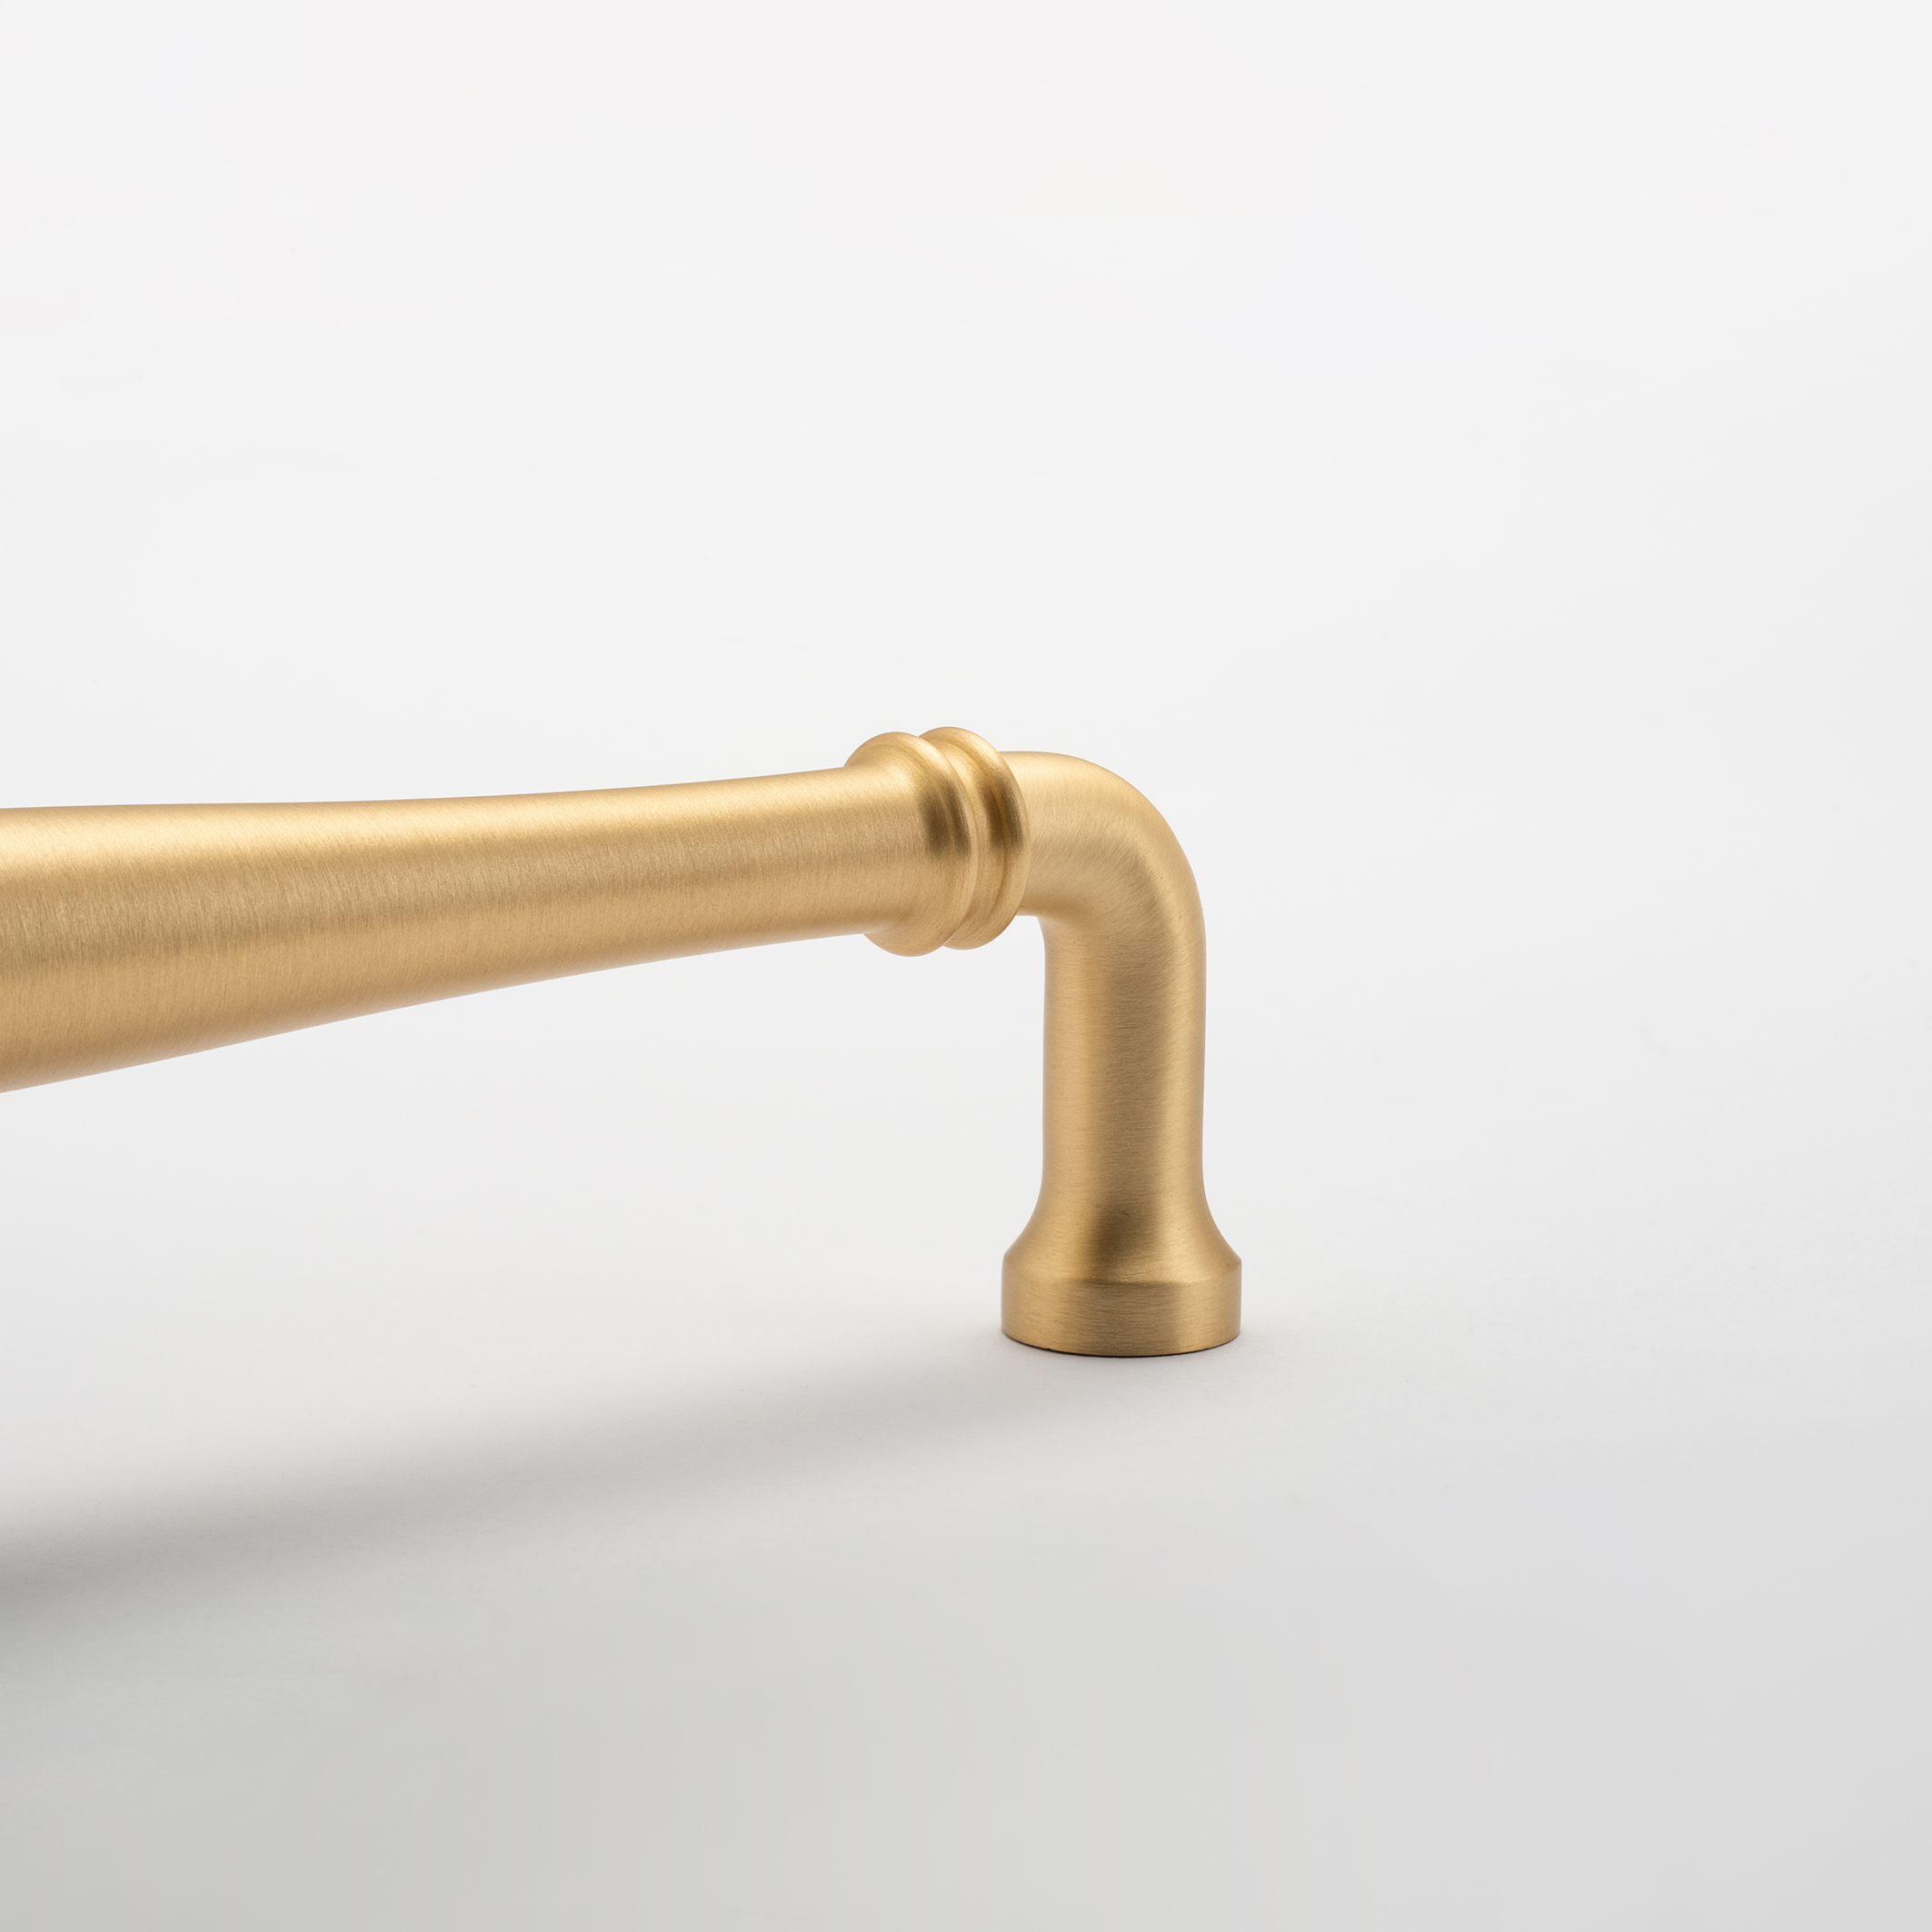 21086 - Sarlat Cabinet Pull - CTC256mm - Brushed Brass